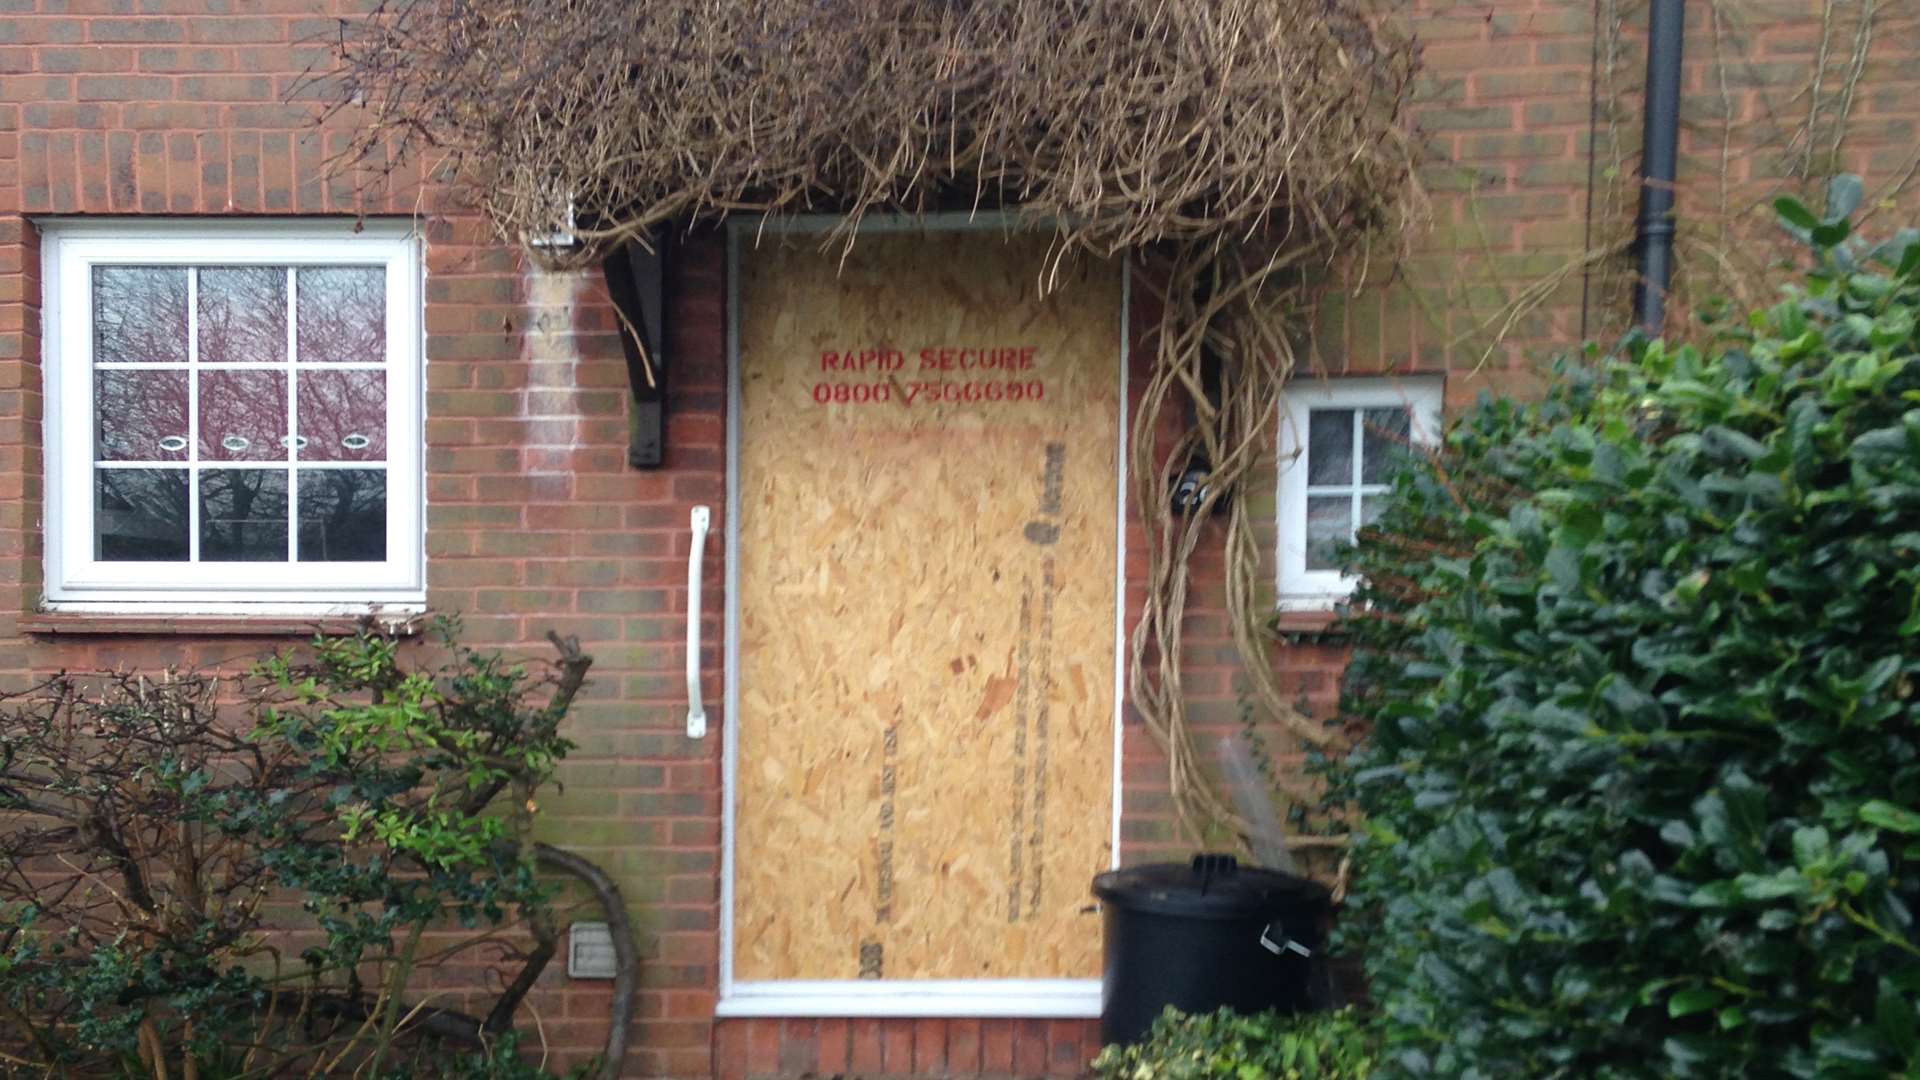 The front door was taken off for forensic examination